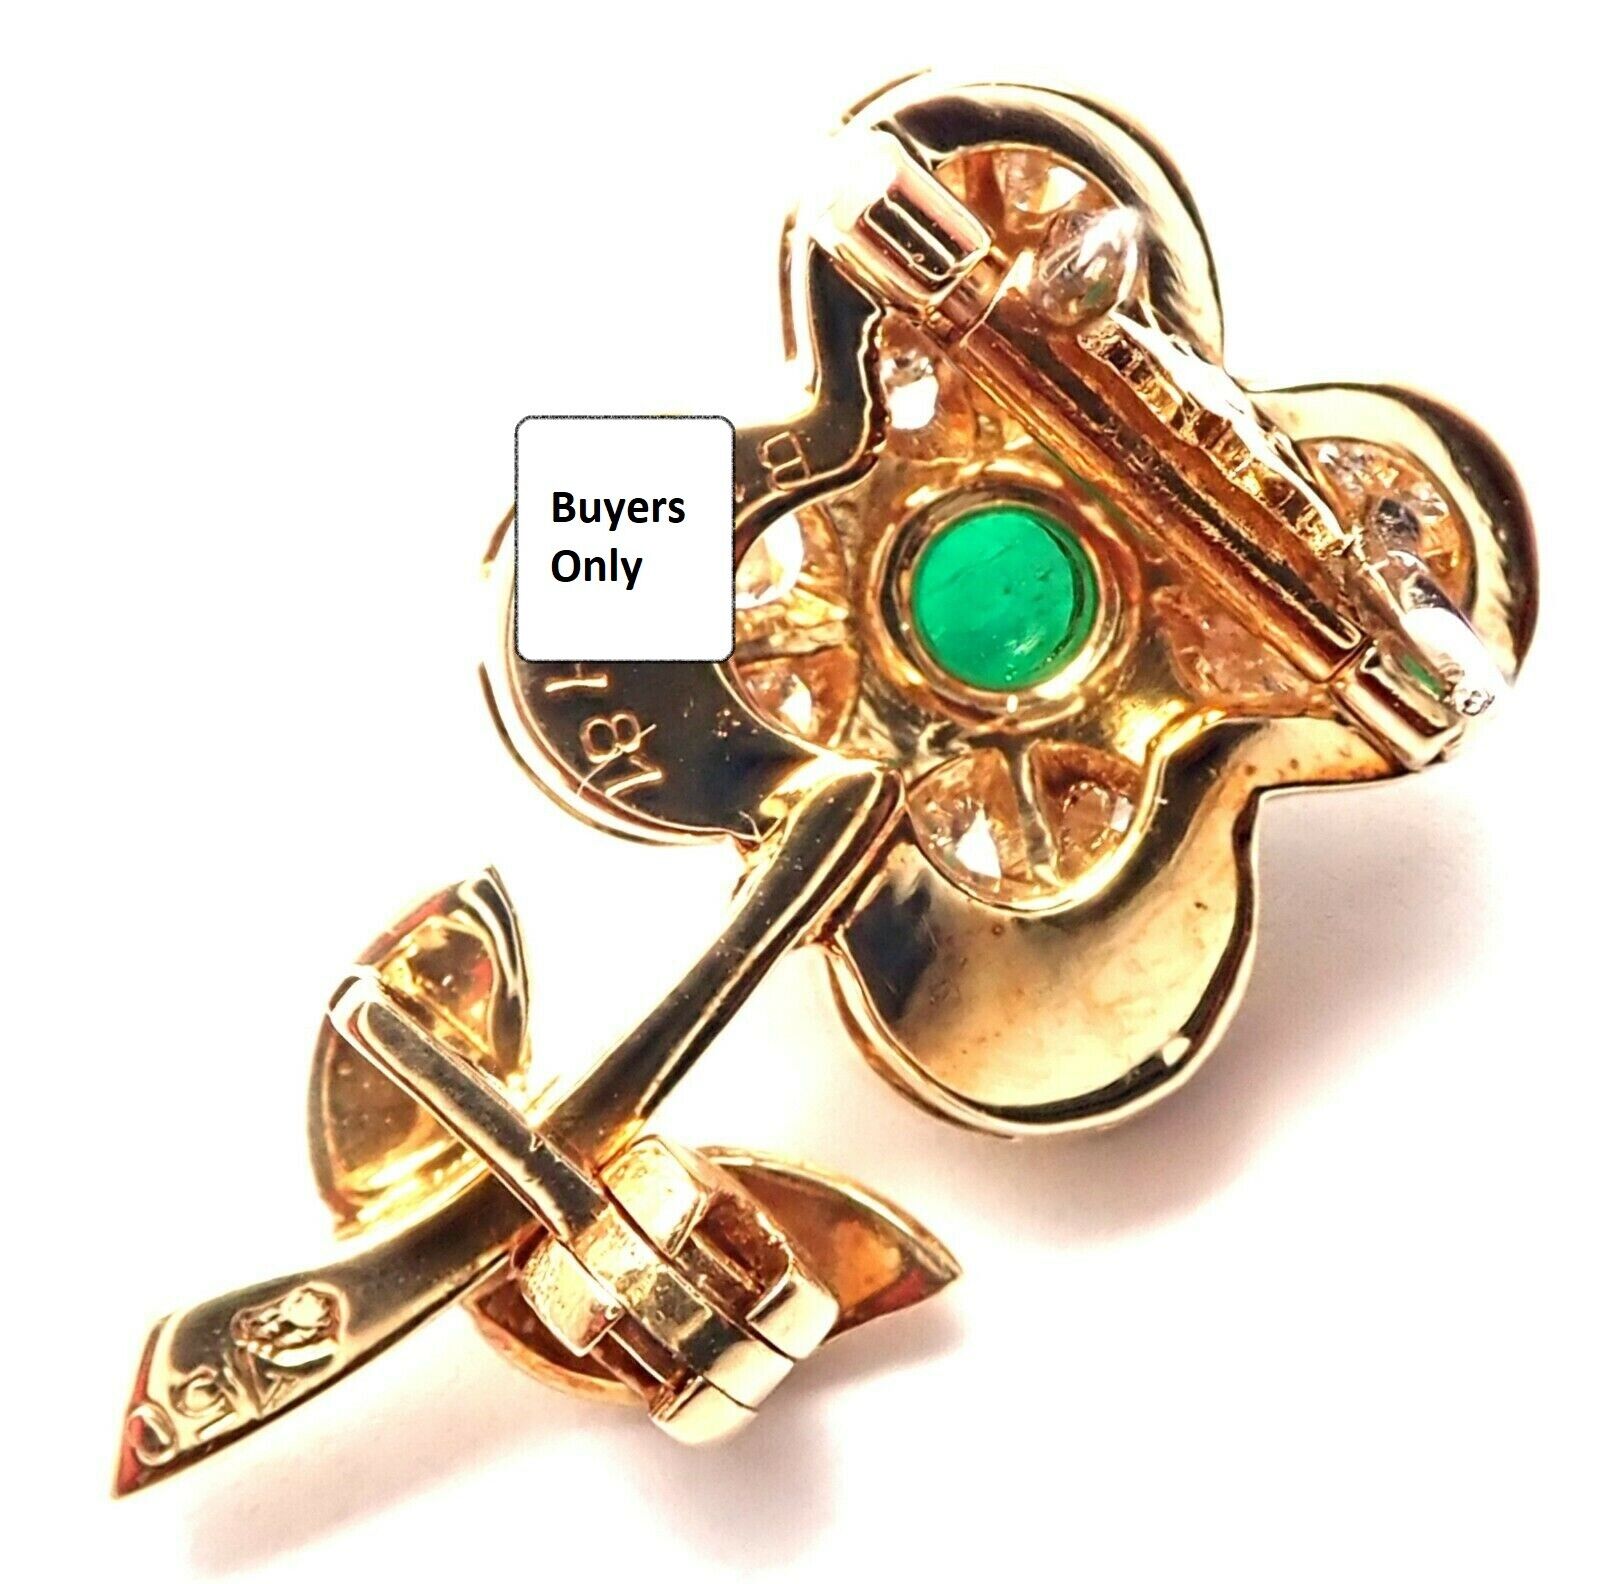 Van Cleef & Arpels Jewelry & Watches:Fine Jewelry:Brooches & Pins Authentic! Van Cleef & Arpels 18k Yellow Gold Diamond Emerald Flower Pin Brooch